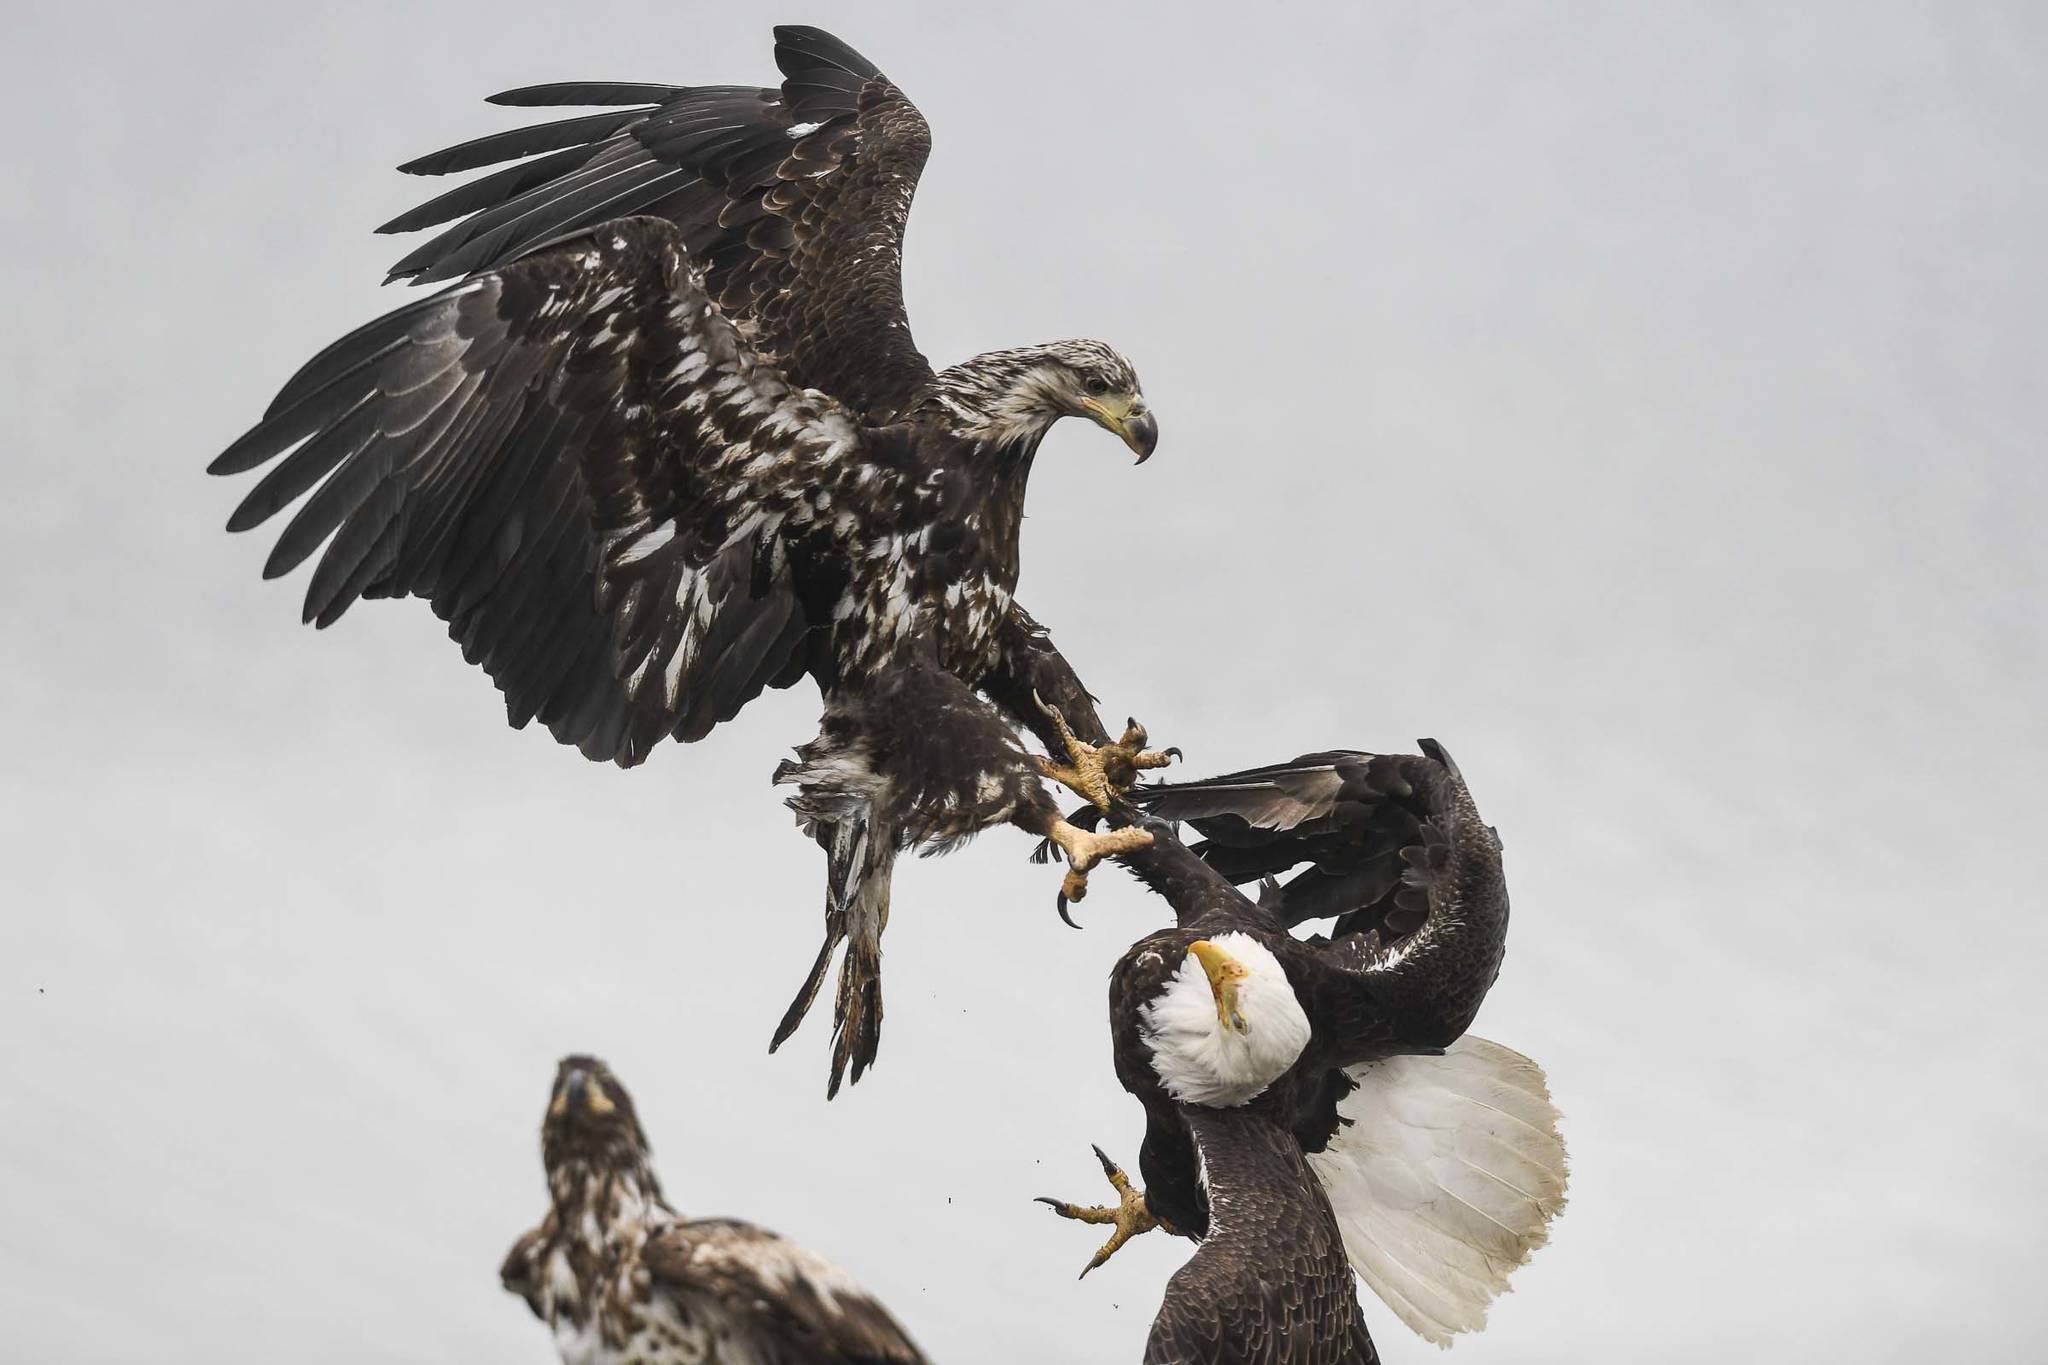 Bald eagles fight as they take advantage of returning salmon to the Macaulay Salmon Hatchery on Tuesday, July 9, 2019. (Michael Penn | Juneau Empire)